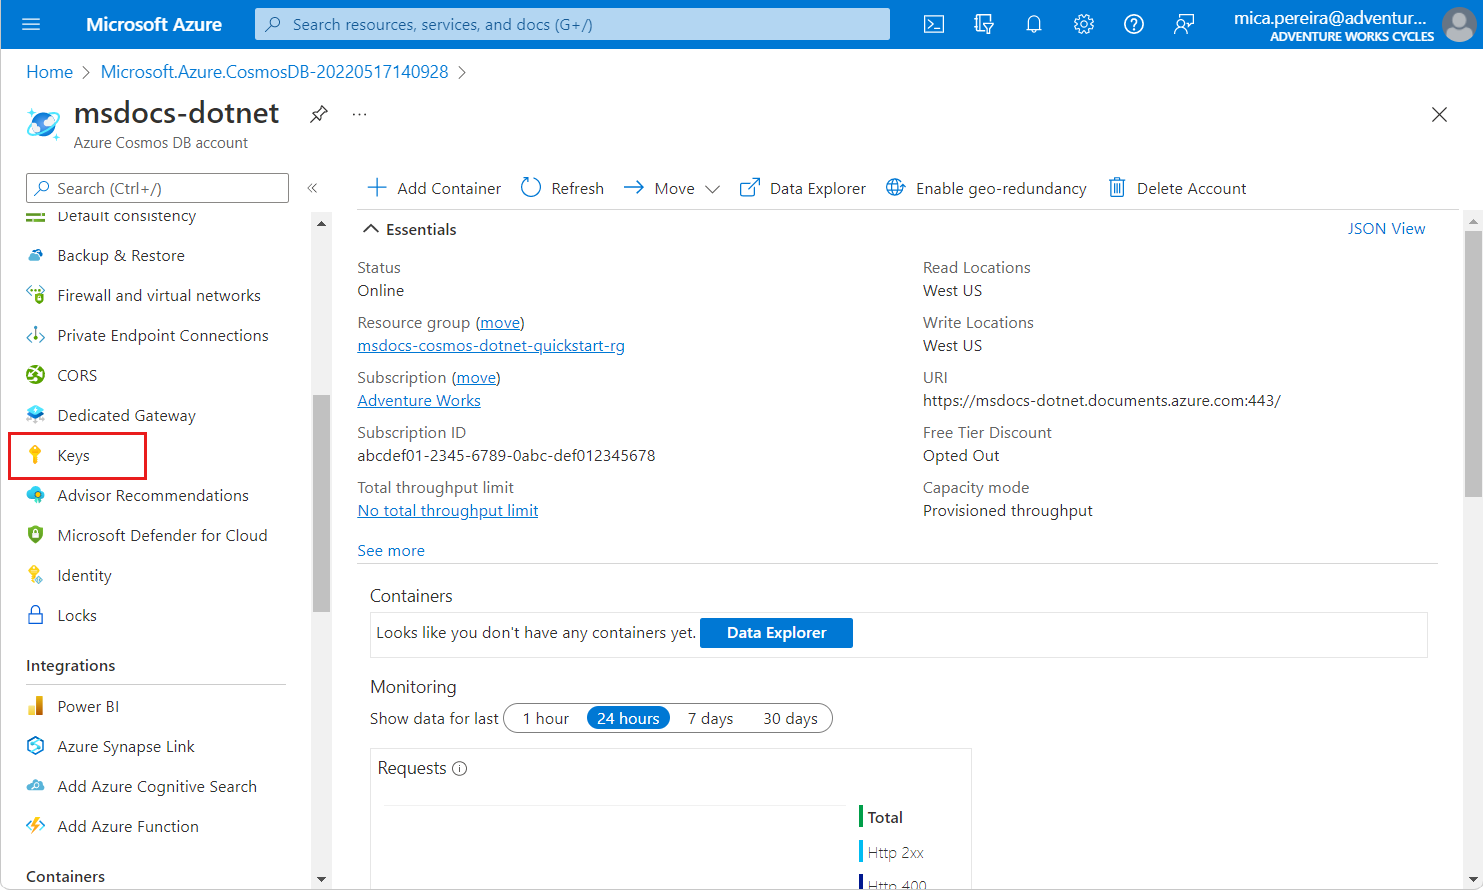 Screenshot of an Azure Cosmos DB SQL API account page. The Keys option is highlighted in the navigation menu.